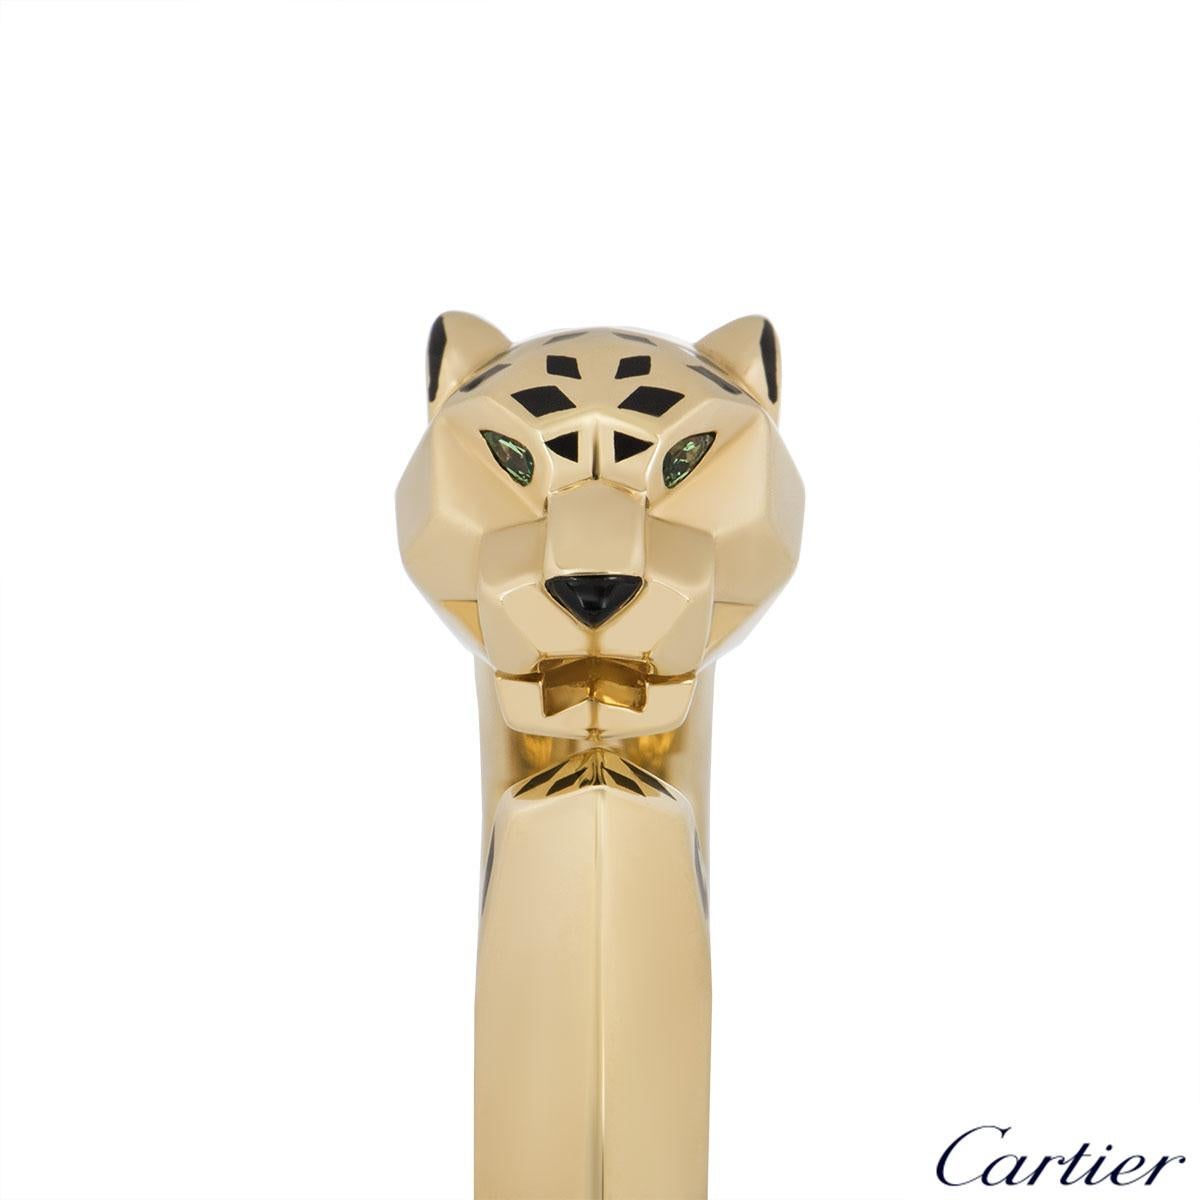 An 18k yellow gold tsavorite, onyx and black lacquer bracelet by Cartier from the Panthere De Cartier collection. The bracelet features the iconic panther head motif set with 2 tsavorite eyes, onyx nose complimented by black lacquer detailing. The